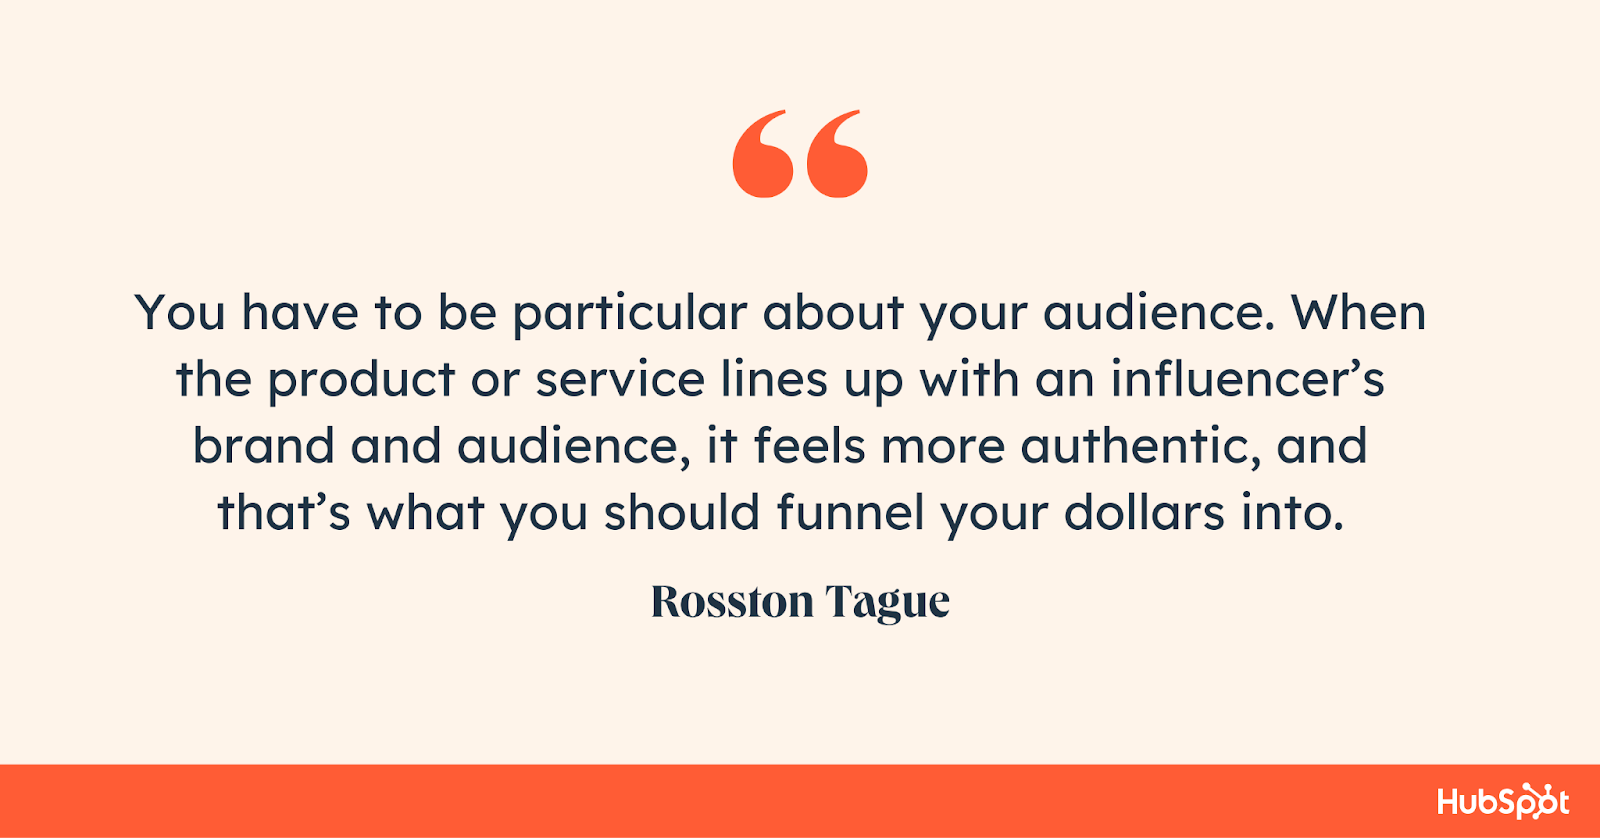 quote on making money on social media with influencer marketing